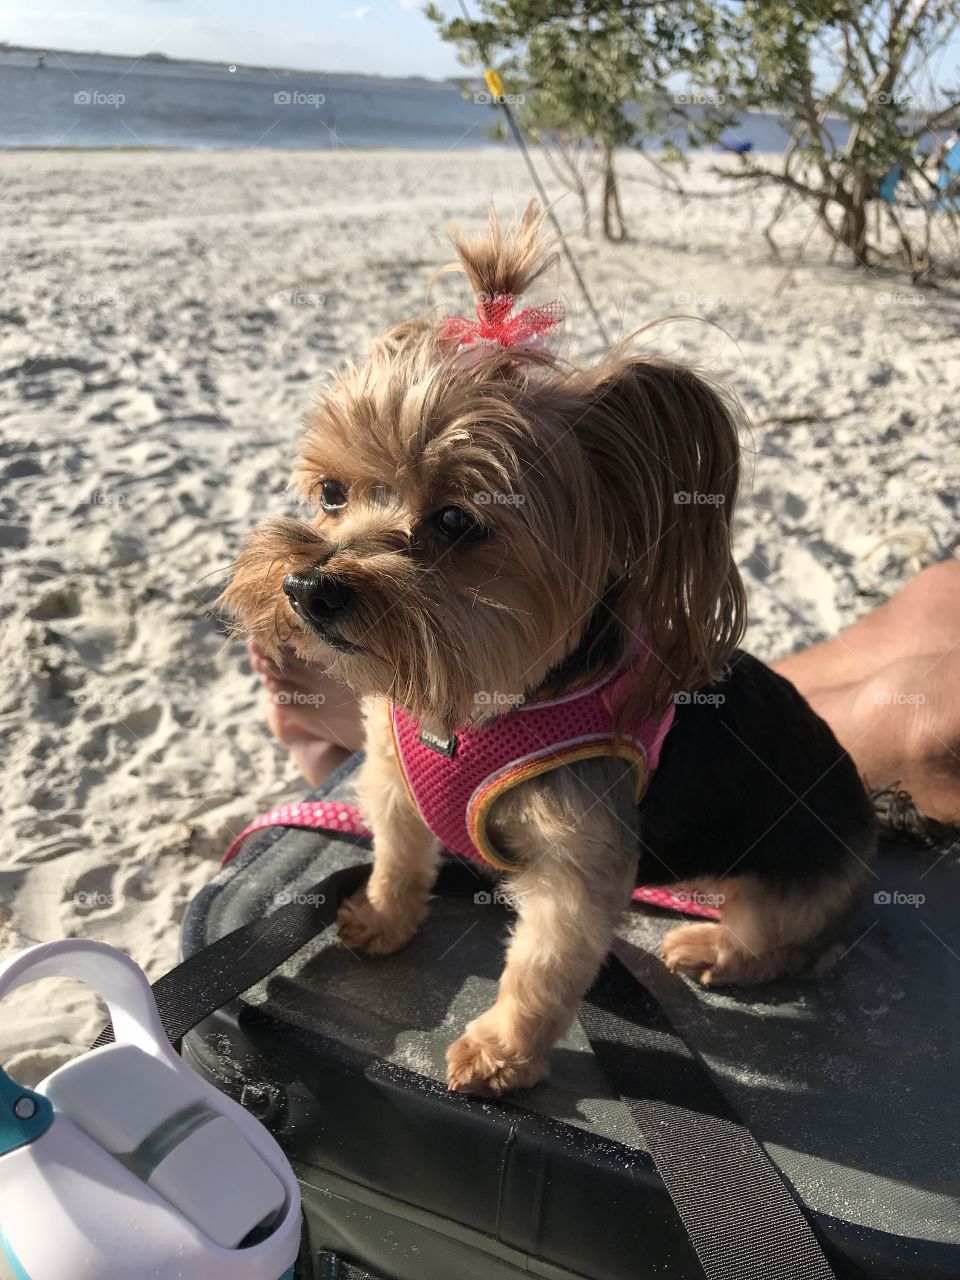 Sassy chilling on the beach in Florida